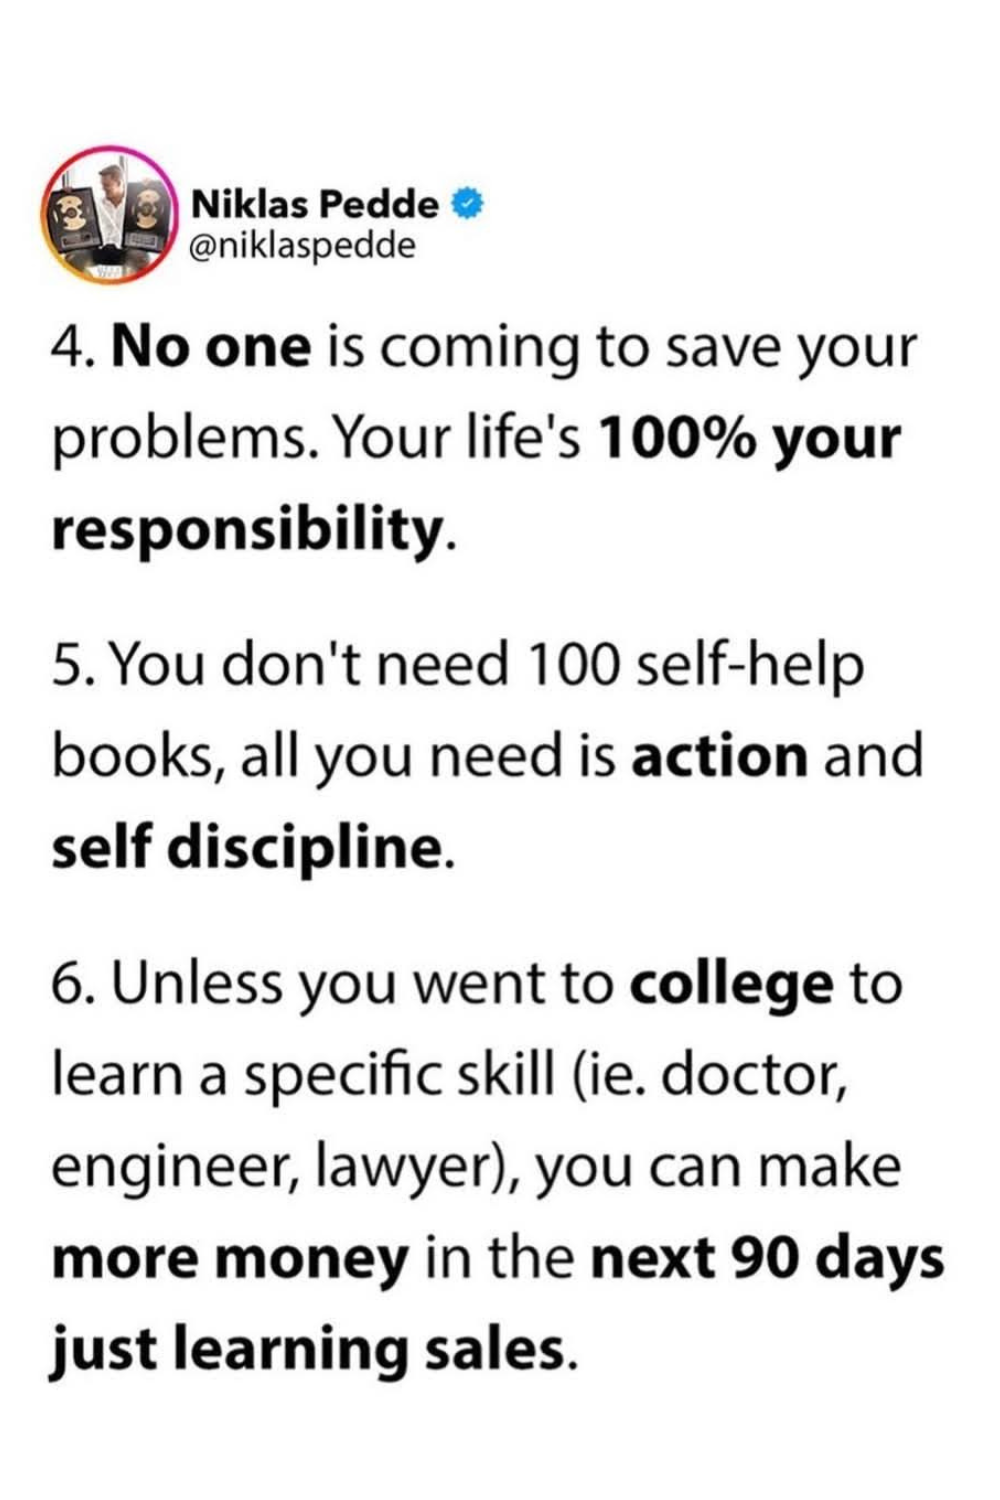 4- No one is coming to save your prblems. Your life's 100% your responsibiltiy. 5- You don't need 100 self-help books, all you need is action and self discipline. 6- Unless you went to college to learn a specific skill (ie., doctor, engineer, lawyer) you can make more money in the next 90 days just learning sales.